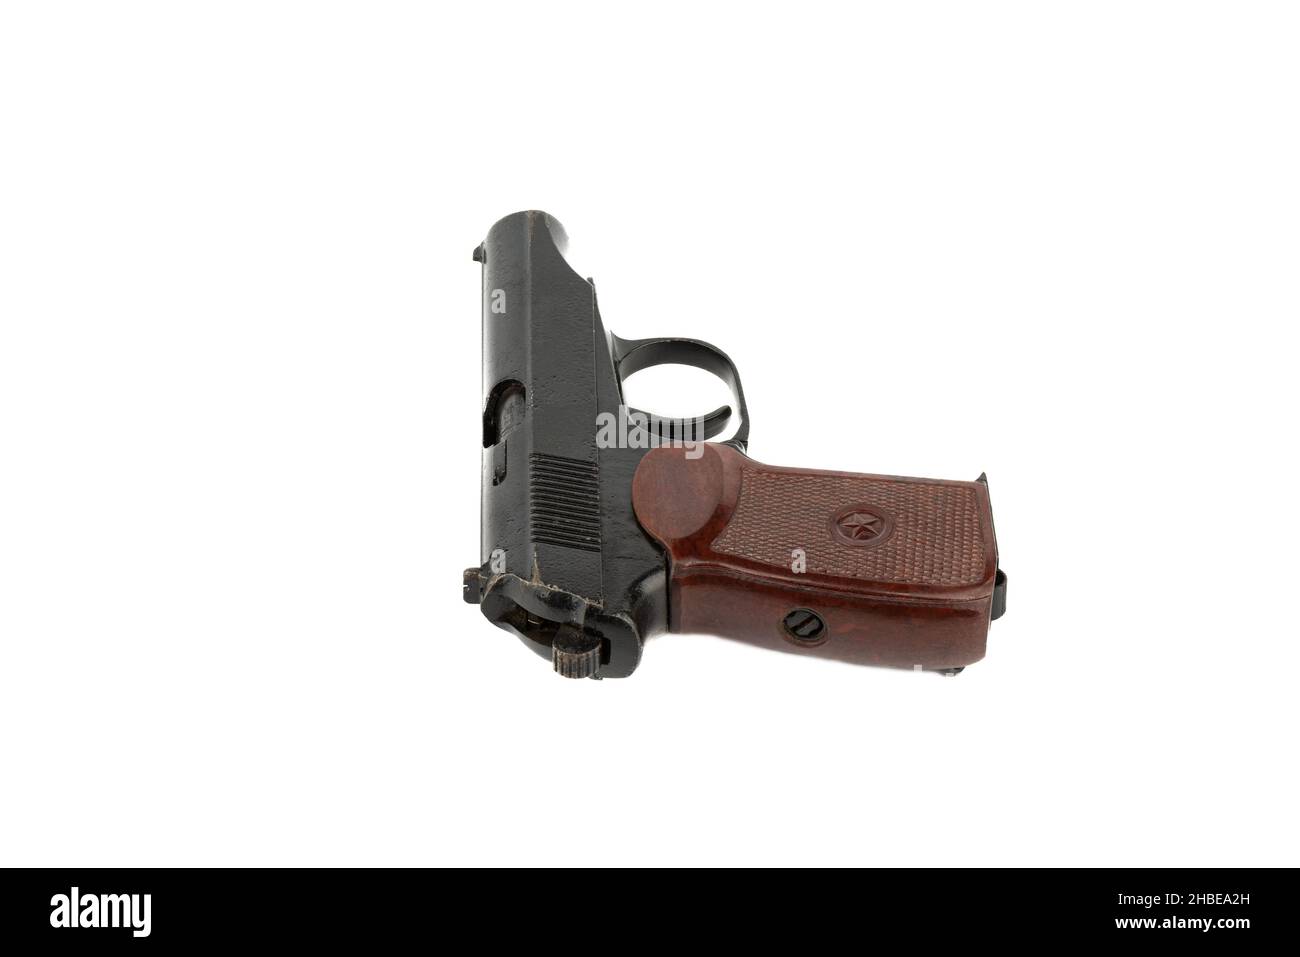 Old used Makarov pistol isolated on white background. Copy space. Stock Photo